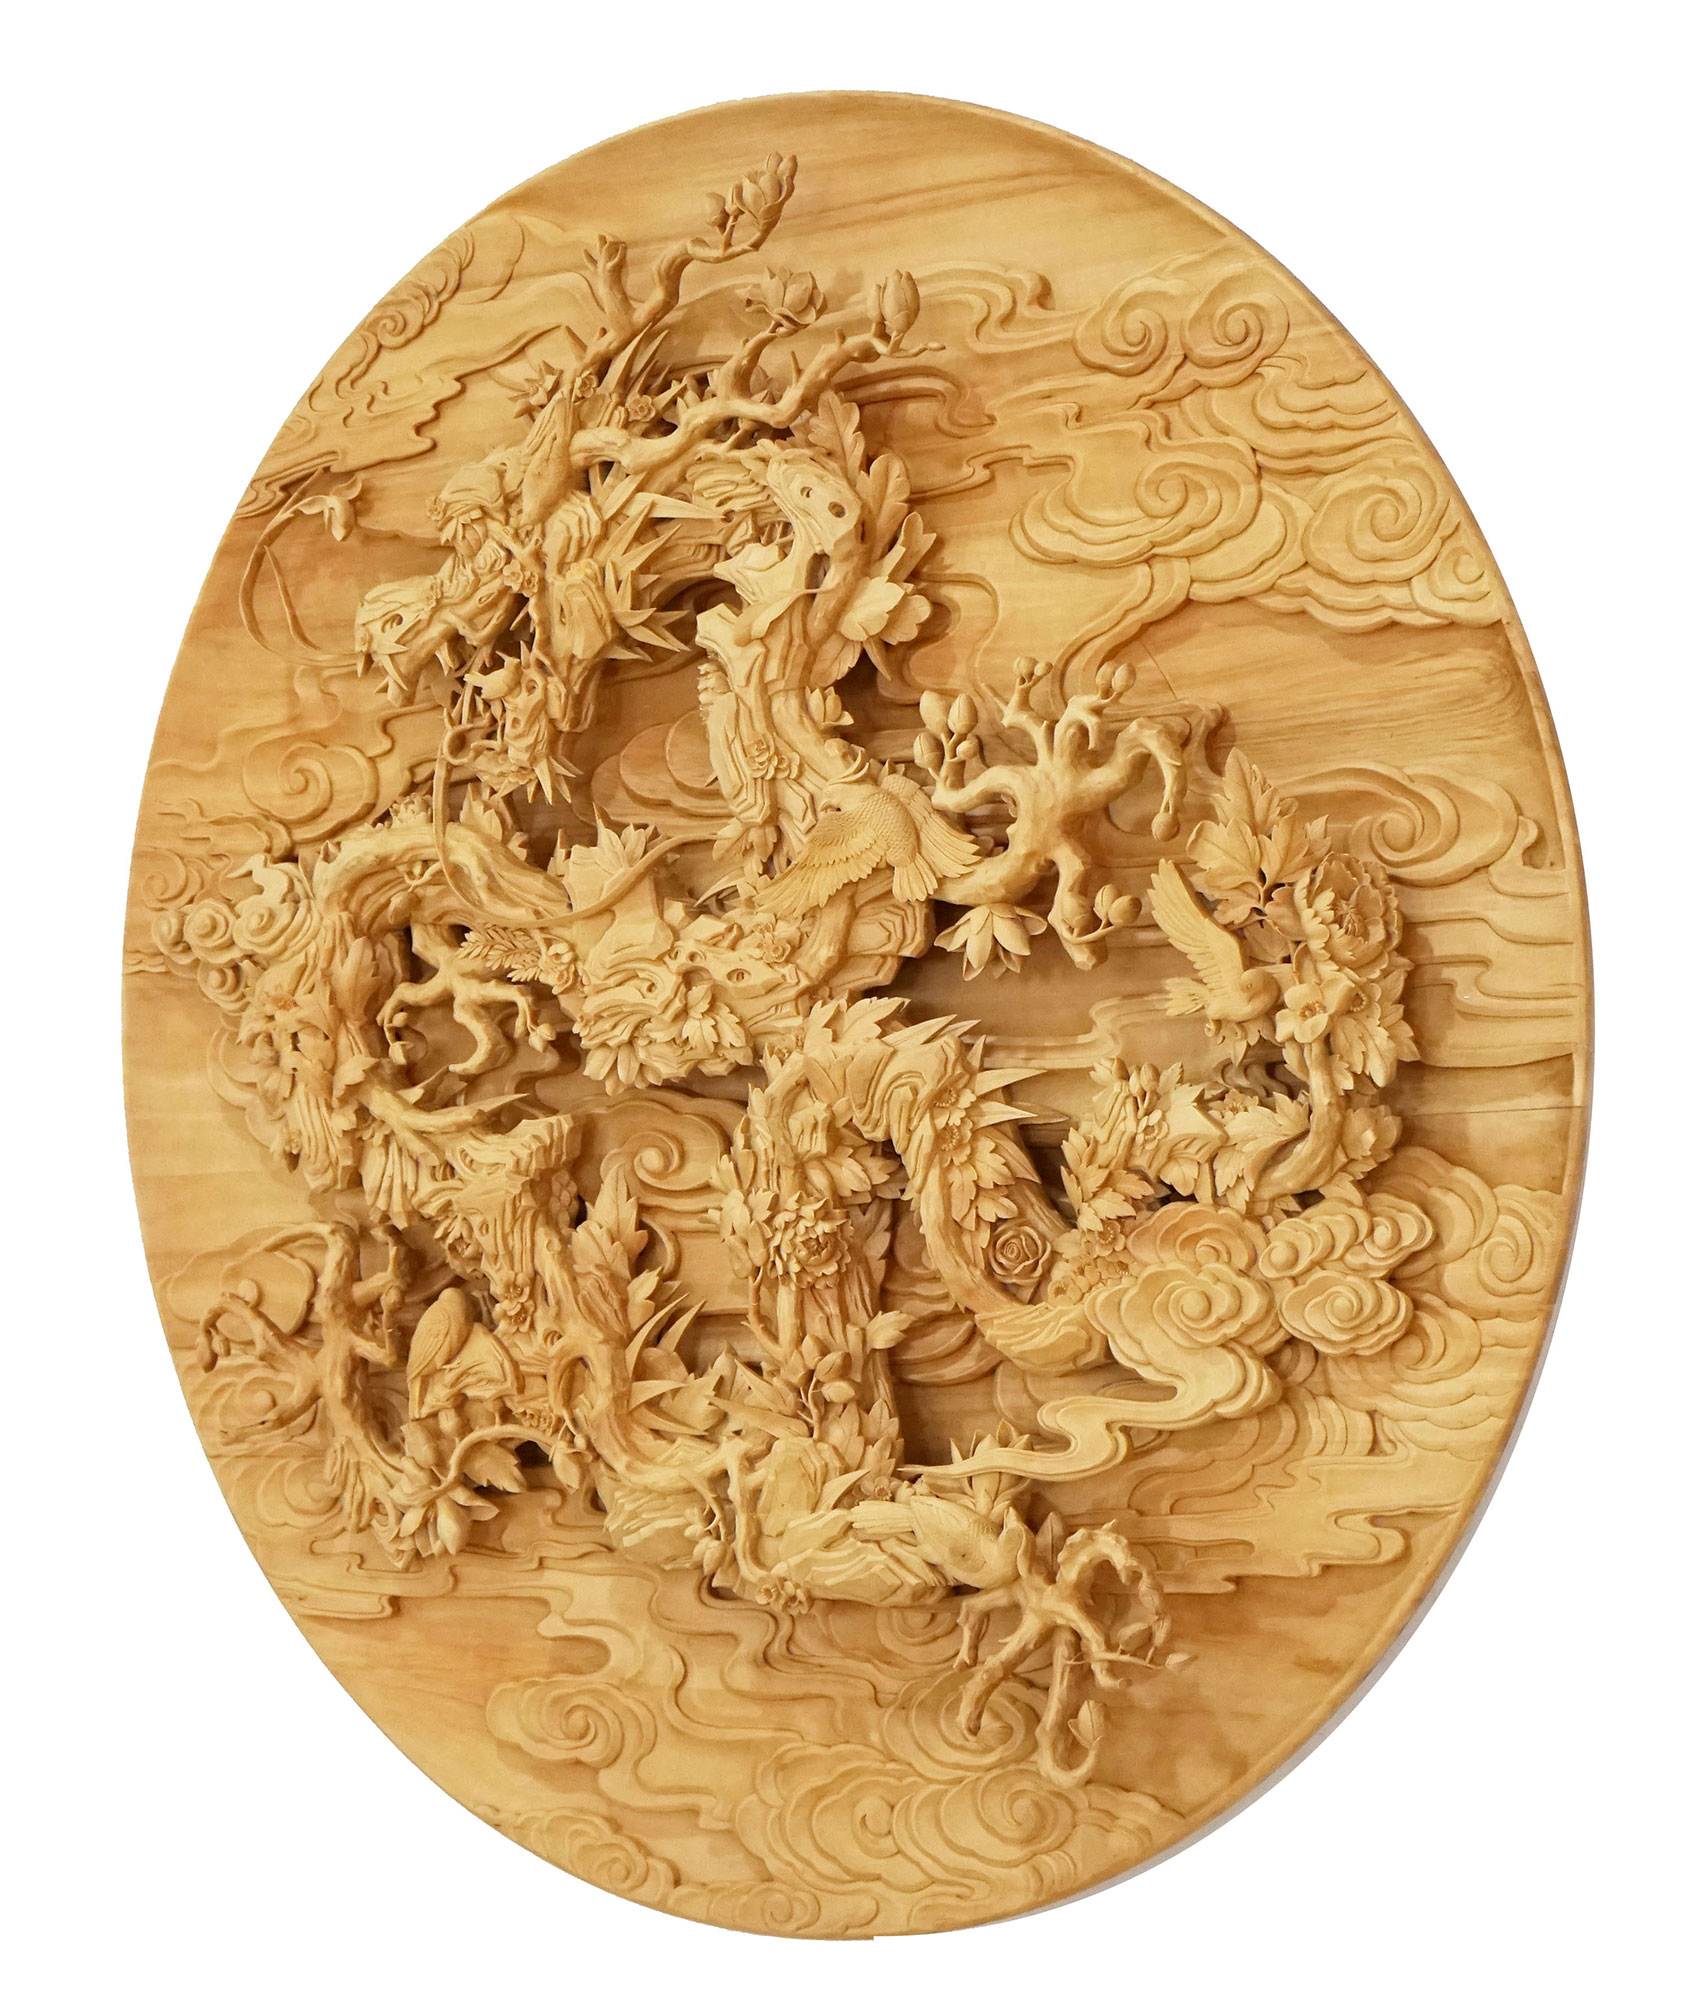 Floral Dragon (Wood Carving)